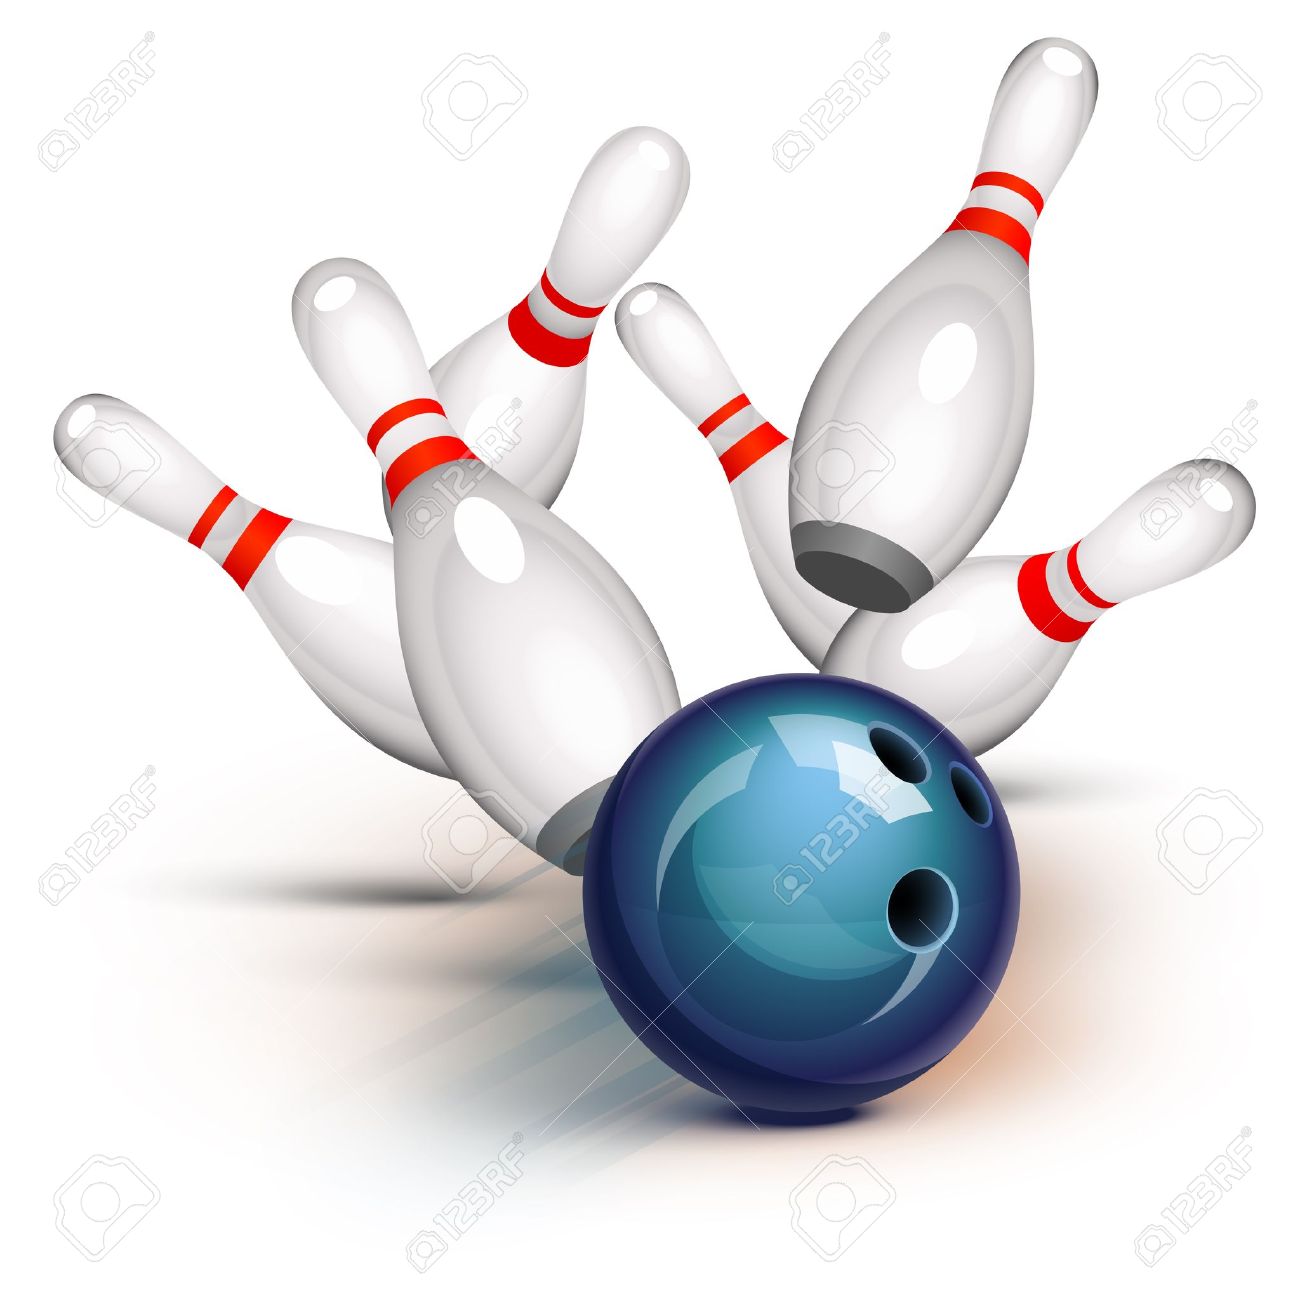 Picture Of Bowling Ball And Pins - KibrisPDR